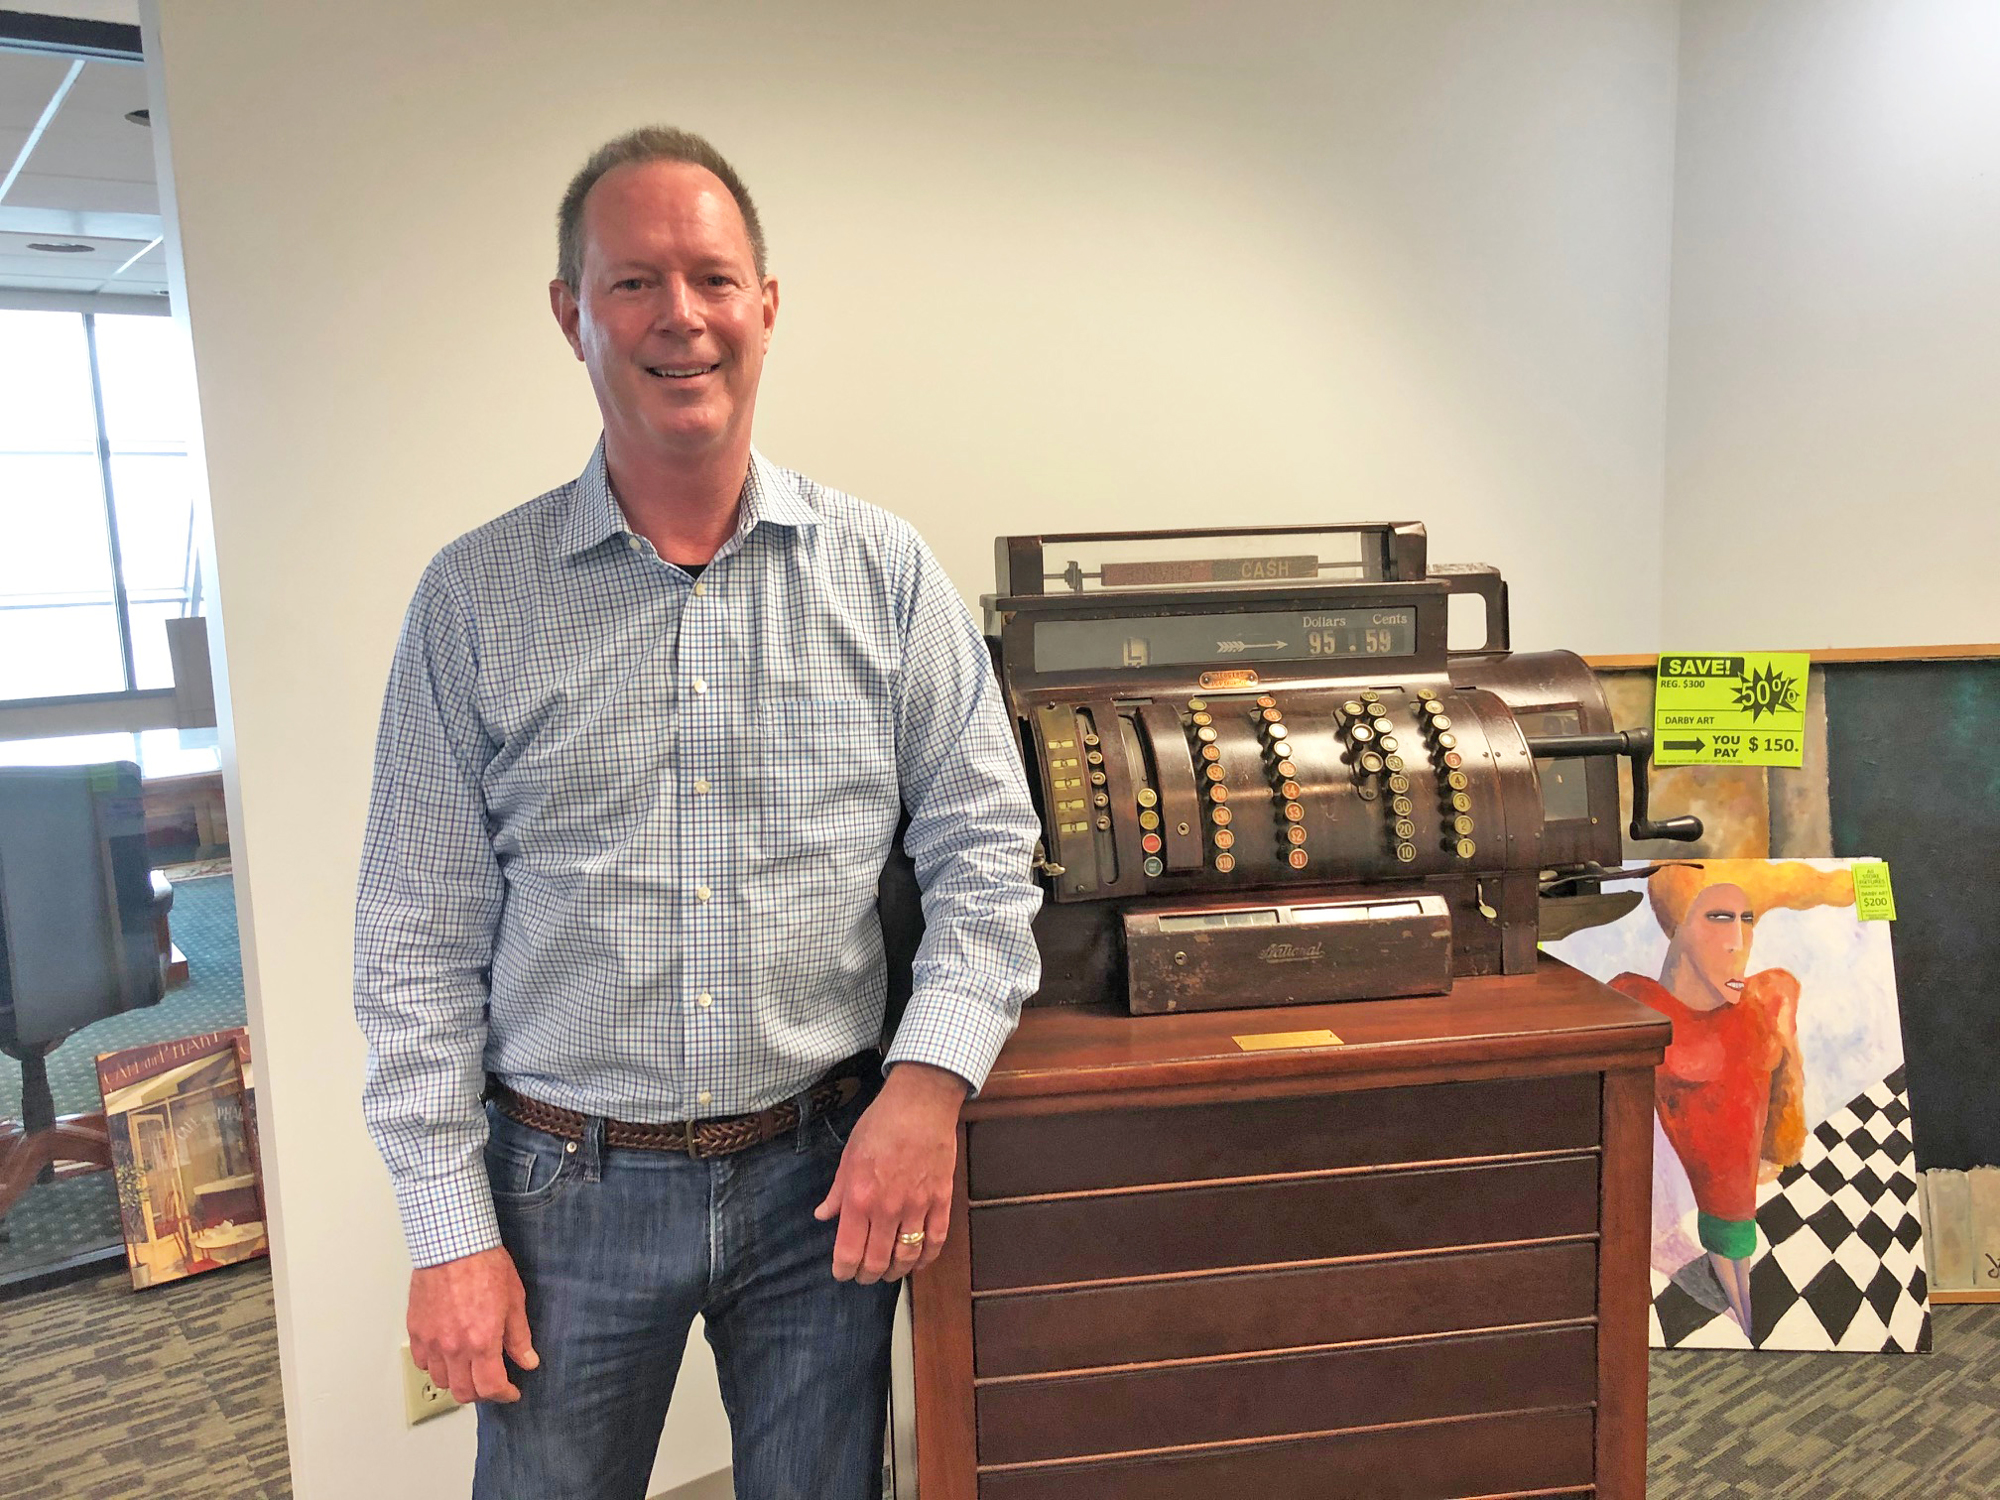 Stein Mart CEO D. Hunt Hawkins with the cash register used in the original Stein Mart store in Greenville, Mississippi, during the 1940s and 1950s. It was donated to the Museum of the Southern Jewish Experience in North Orleans.